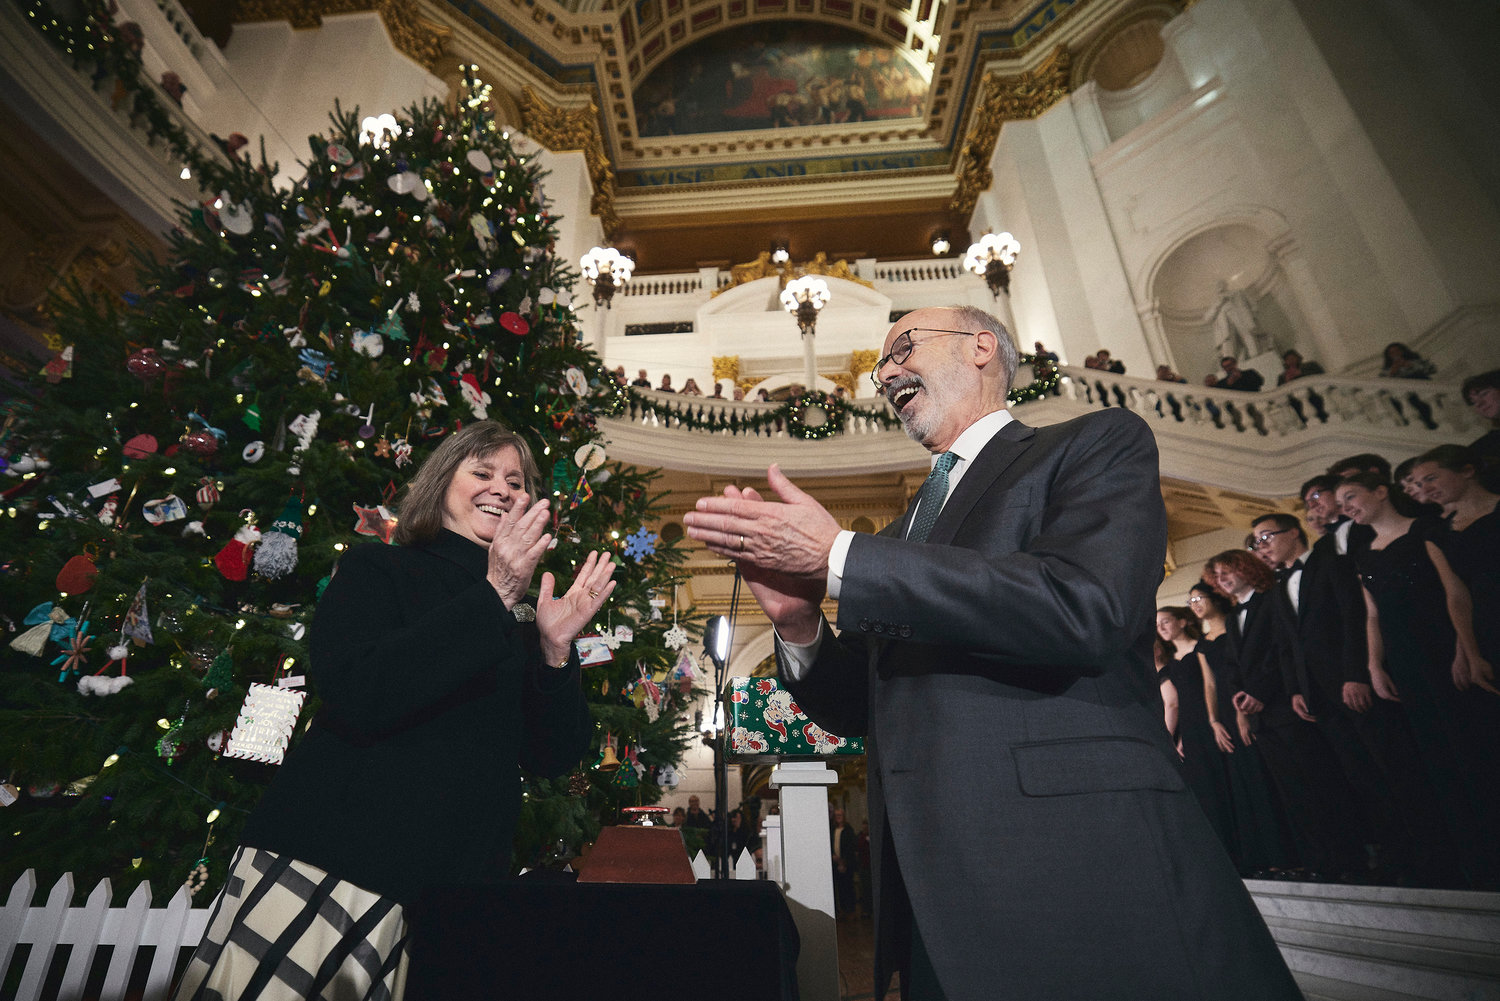 Governor Tom Wolf and First Lady Frances Wolf lighting the tree.  Today, Governor Tom Wolf and First Lady Frances Wolf ushered in the 2022 holiday season at the Capitol in Harrisburg with the 2022 Tree Lighting Ceremony.   December 5, 2022 -- Harrisburg, PA